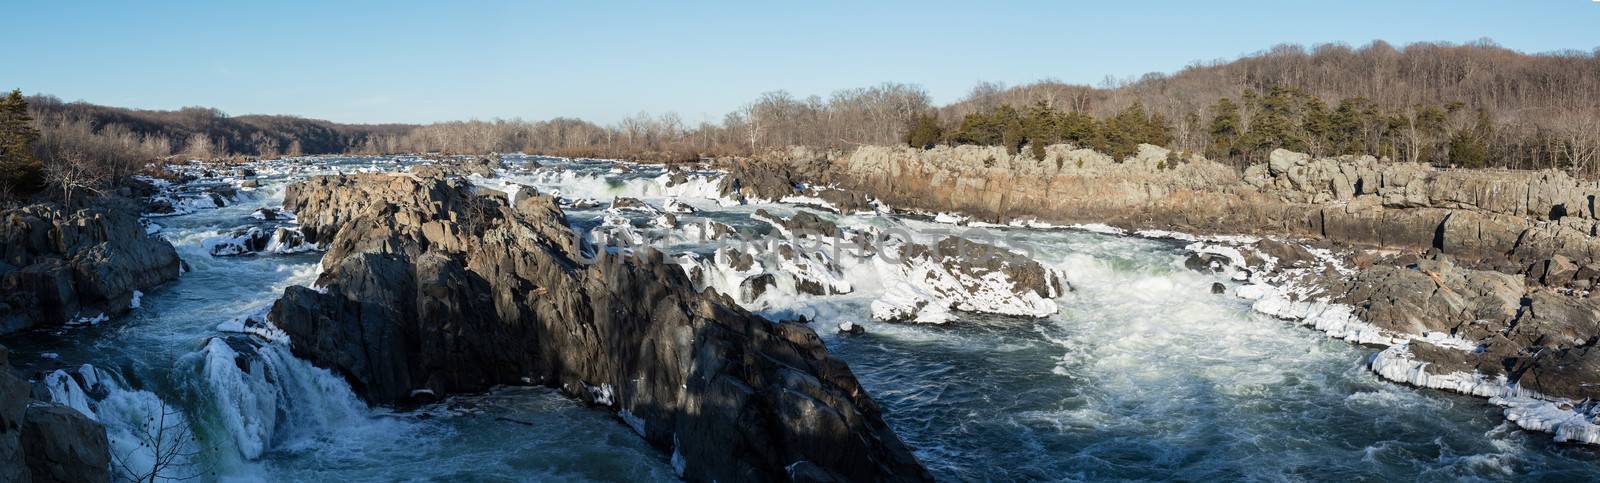 Panorama of Great Falls on Potomac river outside Washington DC in winter with ice forming on the cascades and snow on the rocks